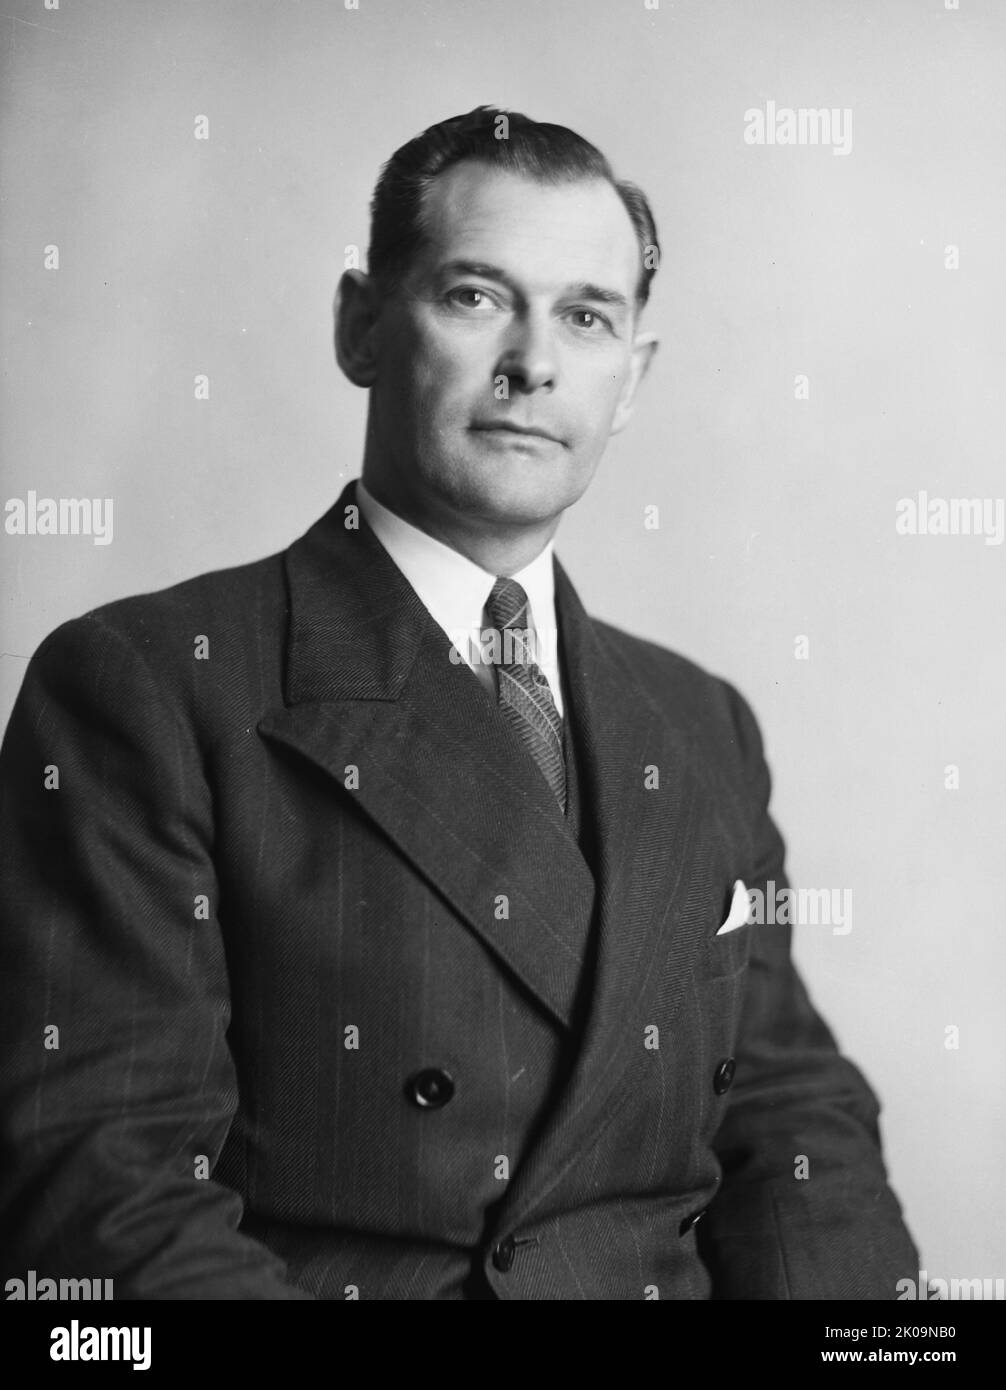 New Zealand Prime Minister-elect Keith Holyoake. Photographed on 12 December, 1960. Sir Keith Jacka Holyoake, KG, GCMG, CH, QSO, PC (11 February 1904 - 8 December 1983) was the 26th prime minister of New Zealand, serving for a brief period in 1957 and then from 1960 to 1972, and also the 13th Governor-General of New Zealand, serving from 1977 to 1980. He is the only New Zealand politician to date to have held both positions. Stock Photo